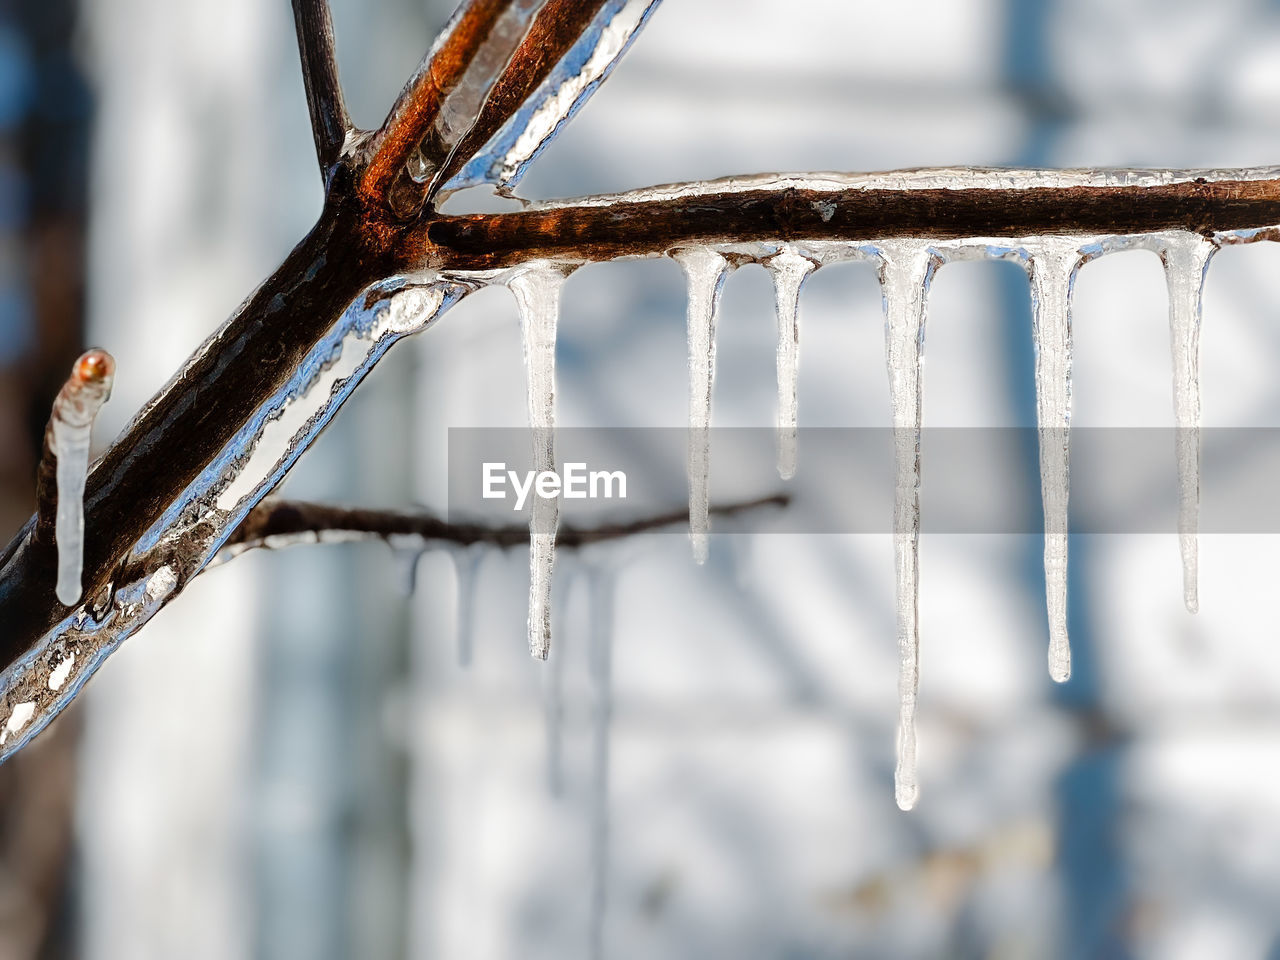 winter, snow, ice, branch, twig, close-up, cold temperature, icicle, freezing, frozen, focus on foreground, nature, no people, spring, frost, macro photography, outdoors, day, environment, selective focus, fence, water, hanging, metal